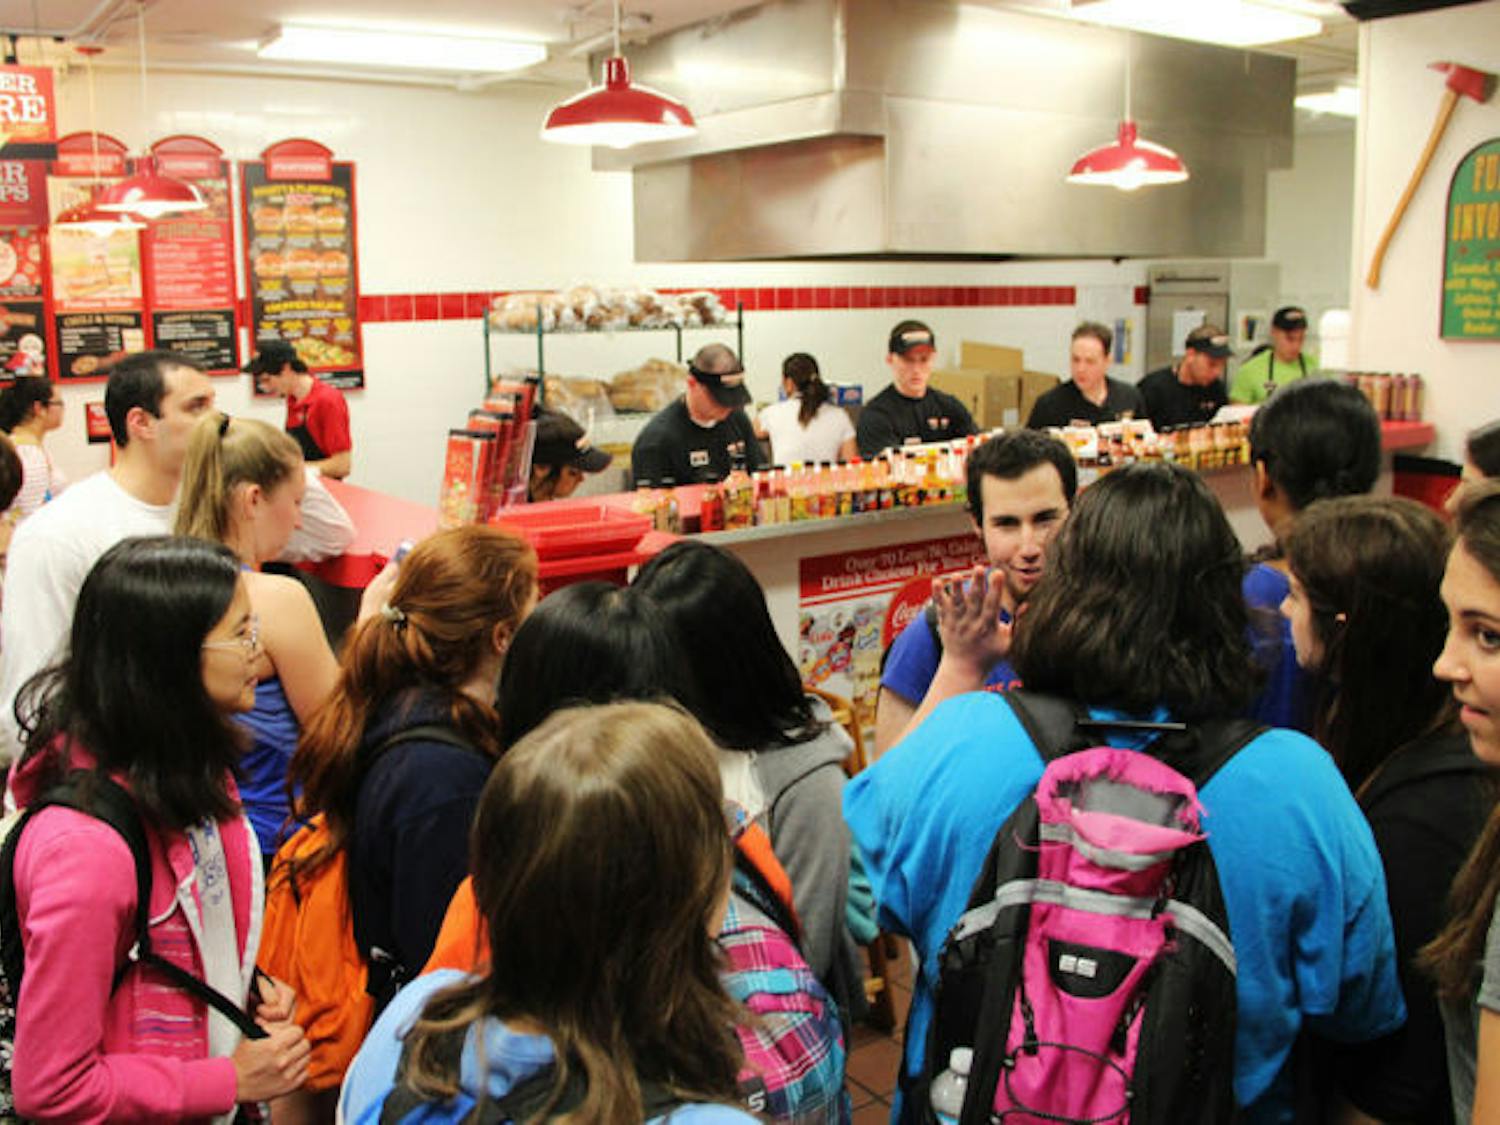 Customers wait in a crowded line in the Firehouse Subs on University Avenue early Tuesday evening. Firehouse gave out free subs to promote its new healthy menu.